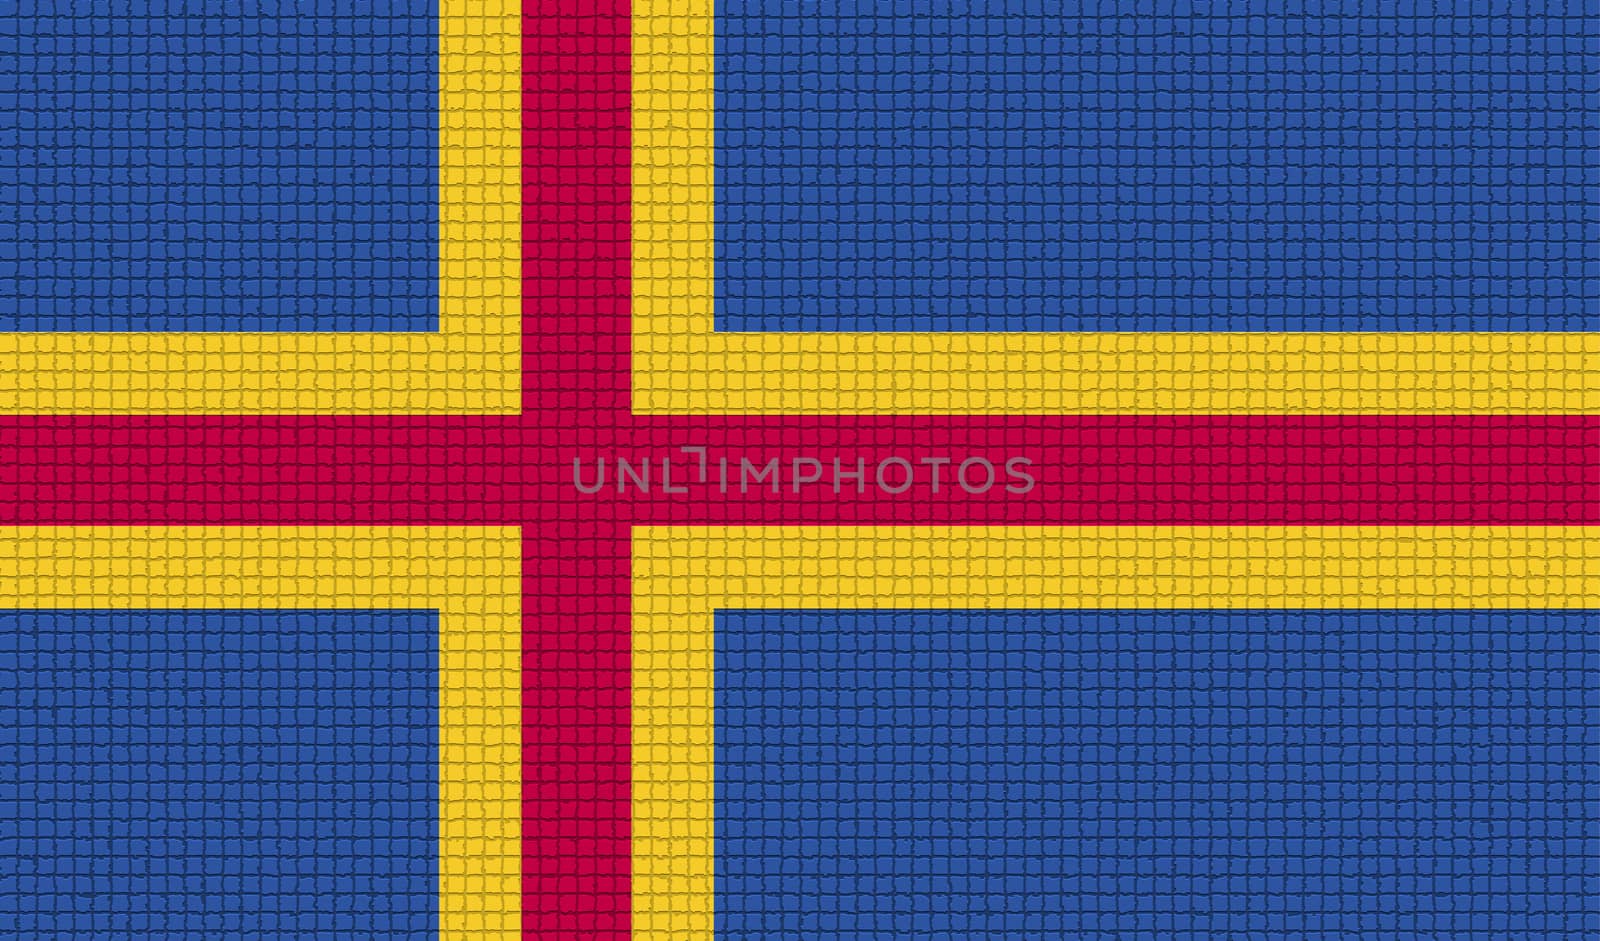 Flags of Aland with abstract textures. Rasterized version